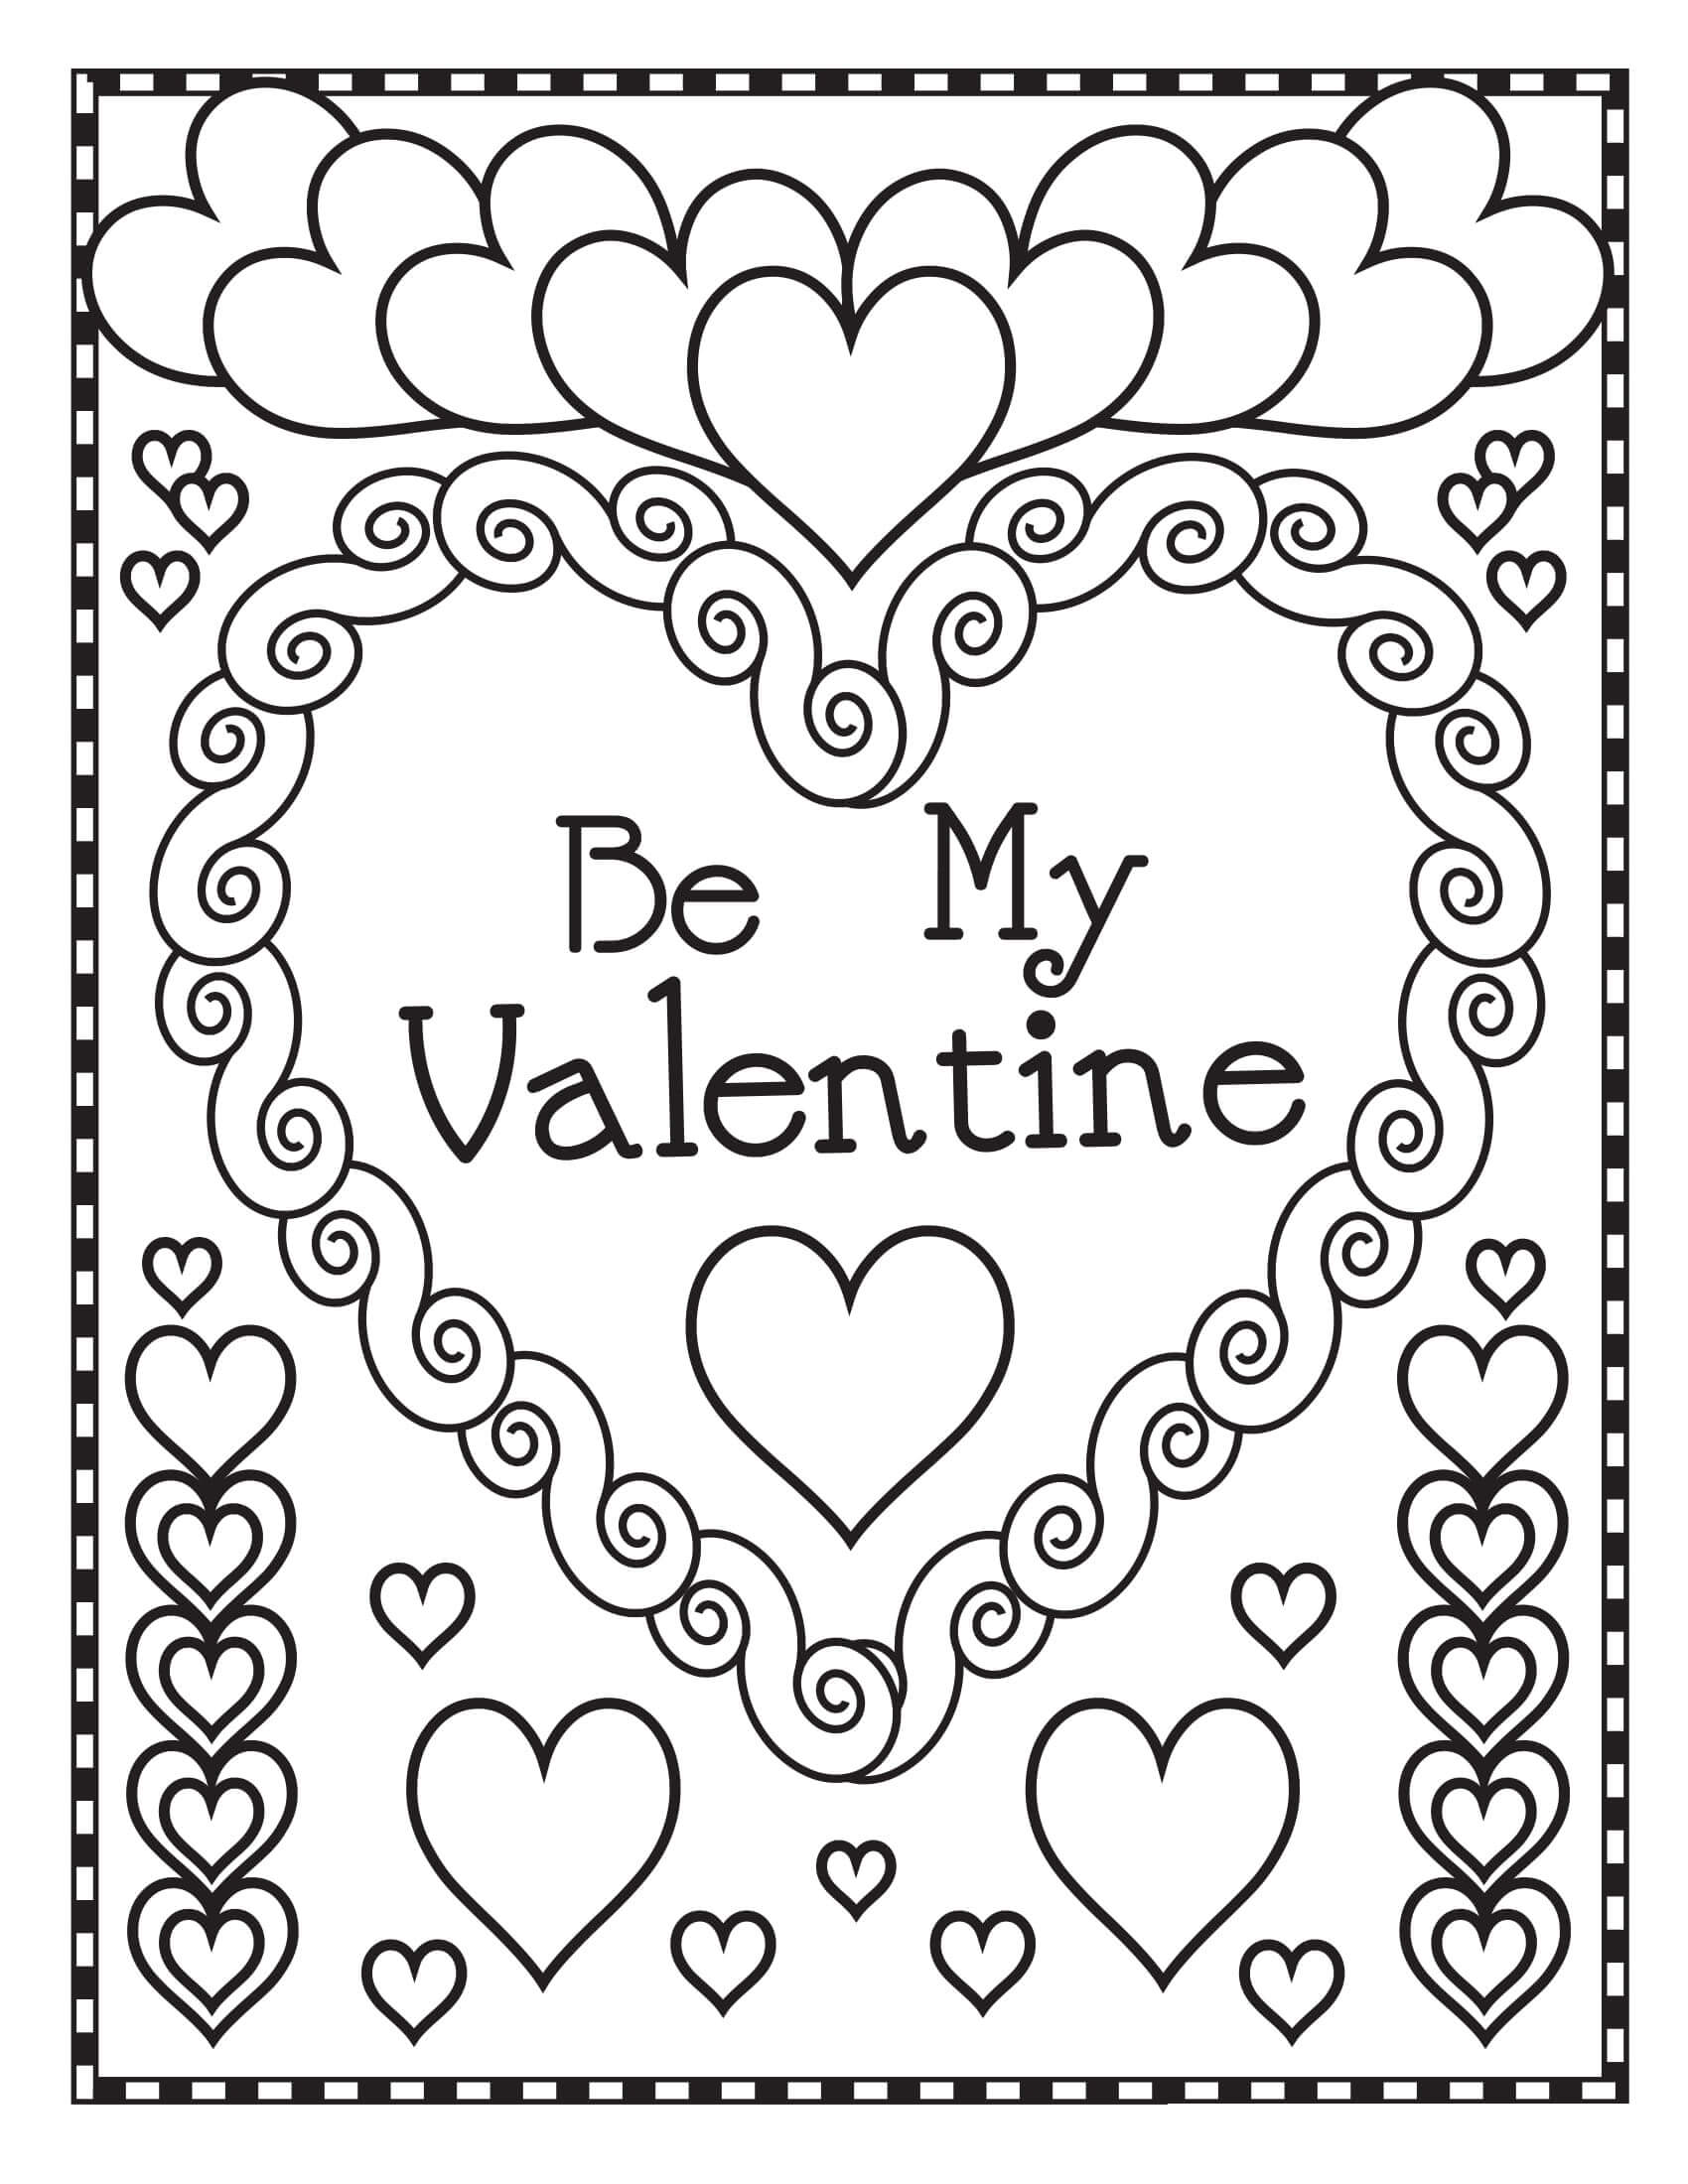 Mandala Heart Be My Valentine Coloring Page